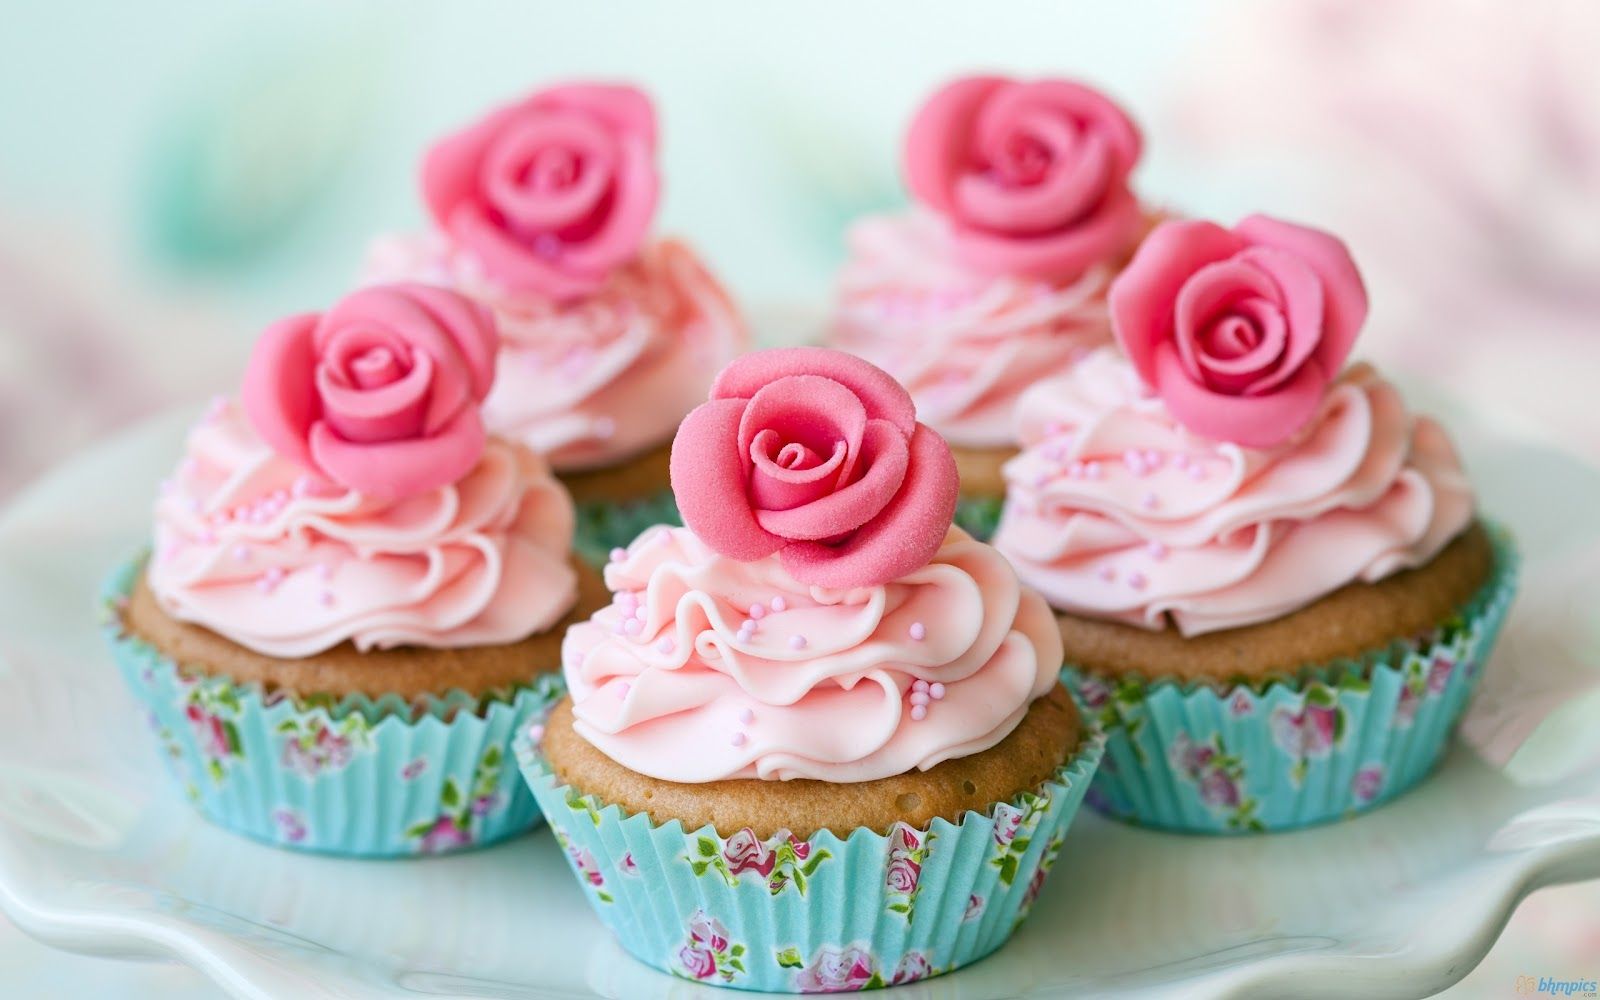 A plate of cupcakes with pink frosting and roses - Cupcakes